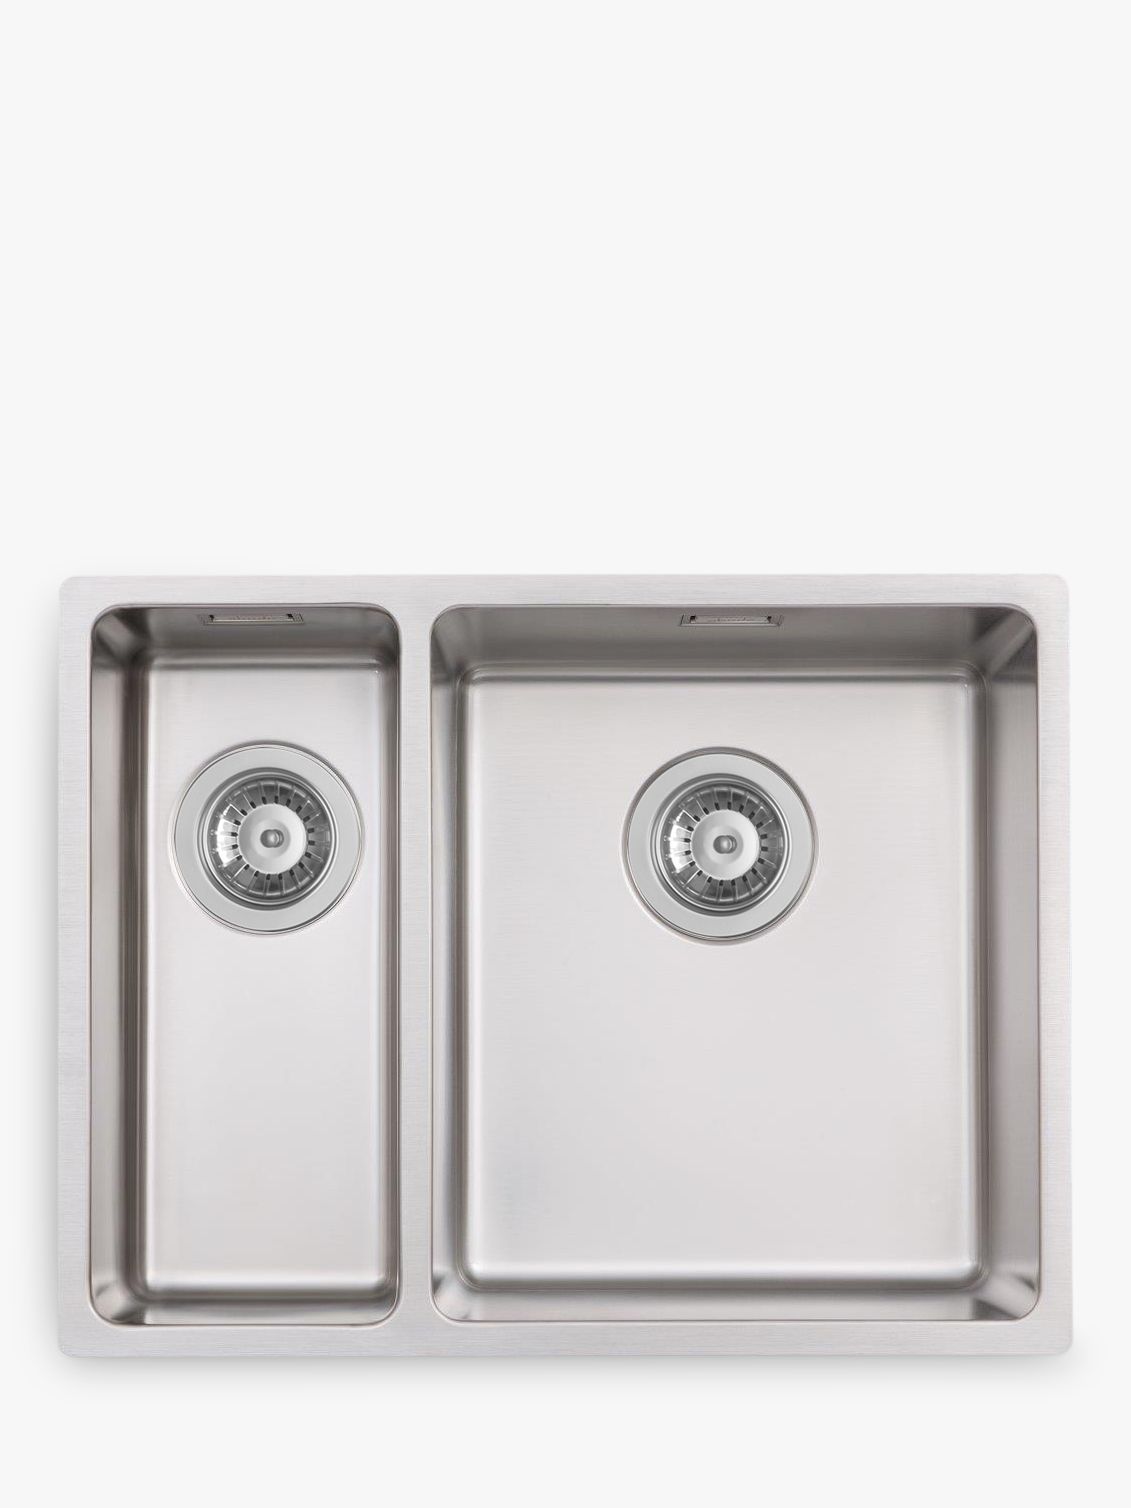 John Lewis 1.5 Right-Hand Bowl Squared Kitchen Sink, Stainless Steel